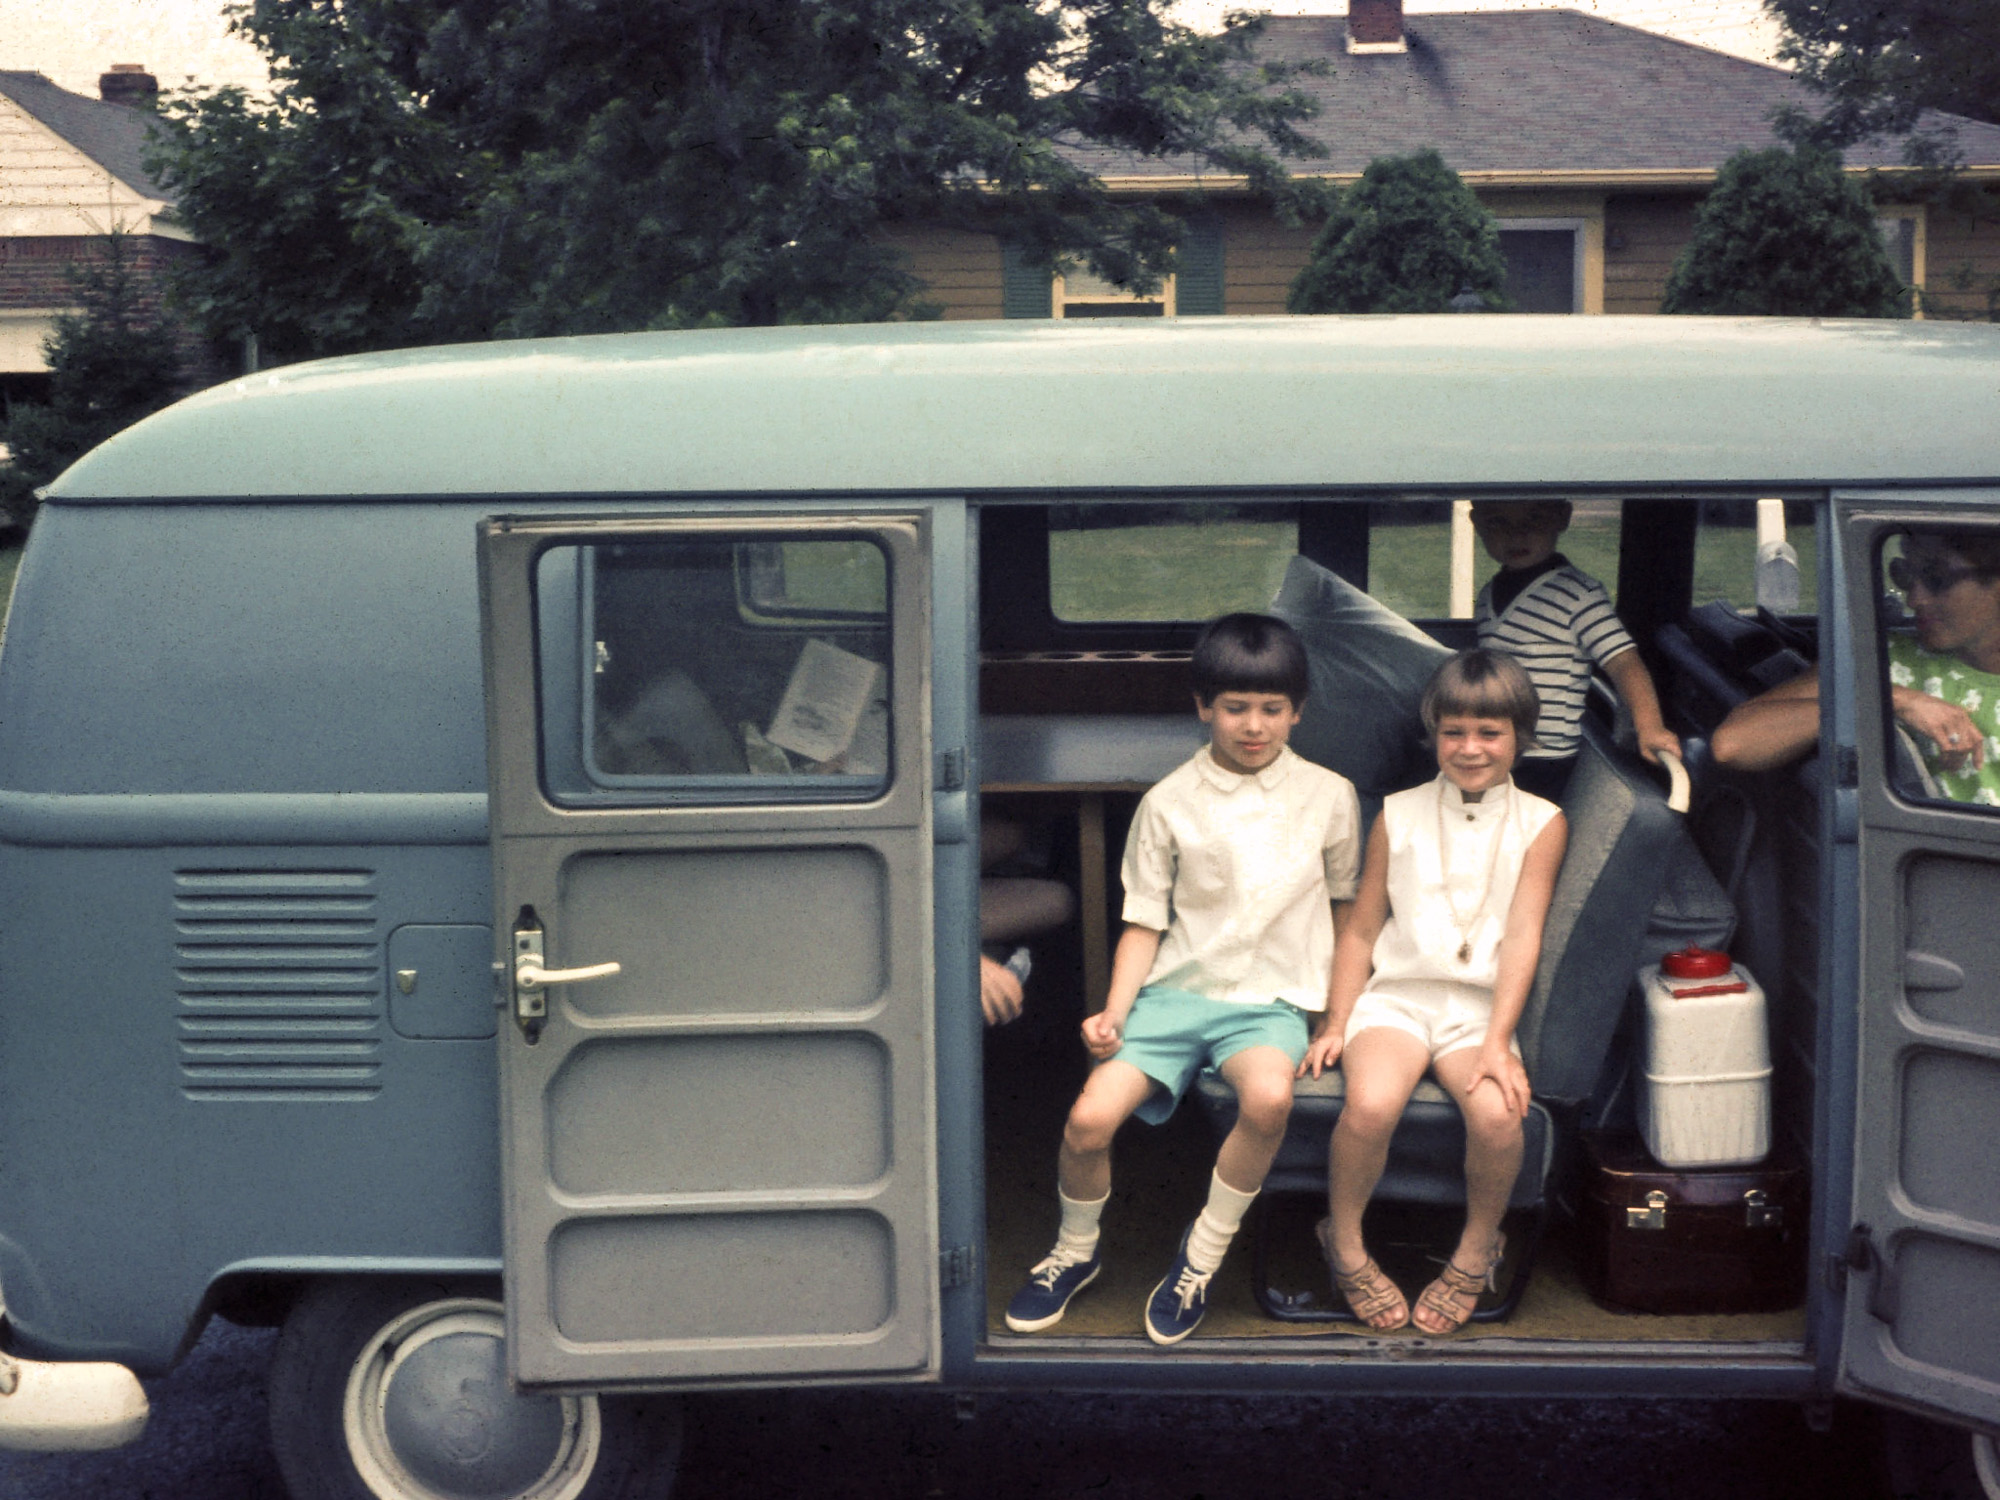 Indianapolis, Indiana, 1969: My sister Anne, age 9, is on the left in the turquoise shorts.  She and her classmate Anne B. are sitting in the B's family VW van ready to leave for their first trip to CYO Camp Rancho Fromasa (near Nashville, IN).

Anne B. appears (literally) not to be a happy camper. In fact my sister said that her classmate stayed unhappy the whole time they were at camp.

While cleaning up the image I realized that the body lying in the back seat reading a book is likely Anne B's older brother, and my classmate, Mark.

35mm Slide film image taken by my father, digitized by my brother and tidied up by me. View full size.